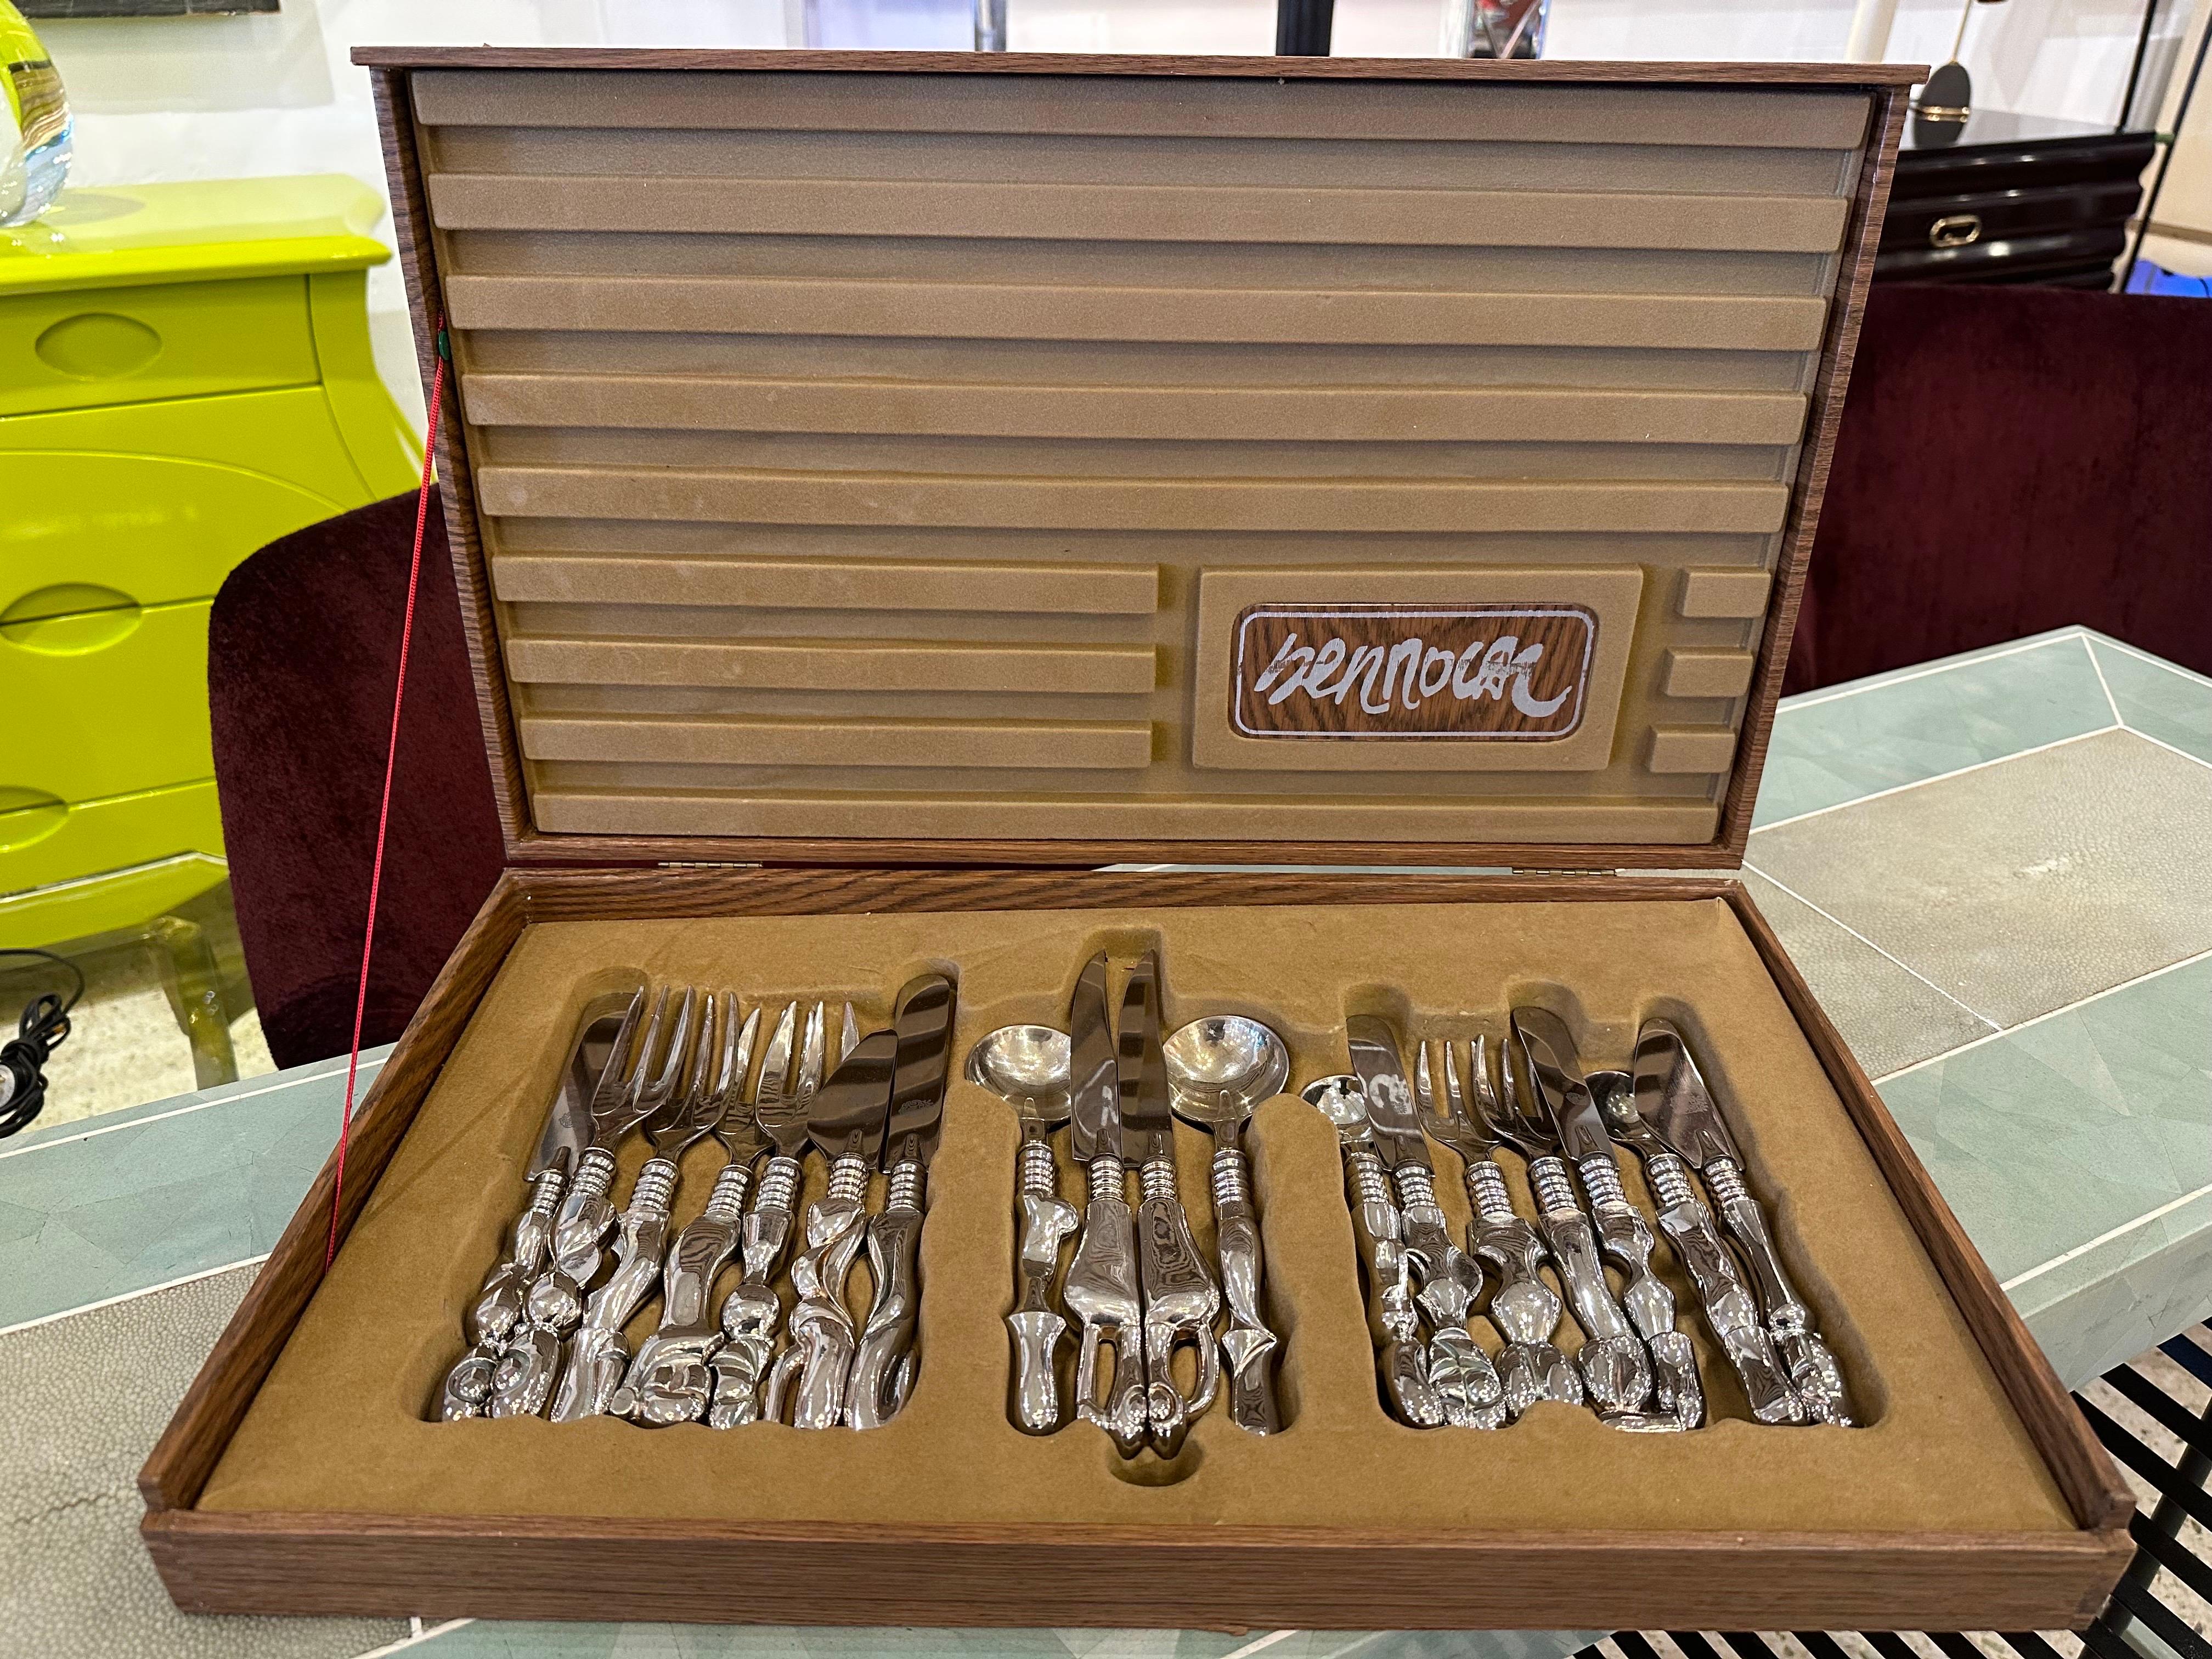 Miguel Ortiz Berrocal (1933-2006), cheese service with 18 unique pieces (forks, knives and spoons). All in silvered metal and in original box with designer name. Provenance and authenticity paperwork included from the Berrocal Foundation in Malaga,